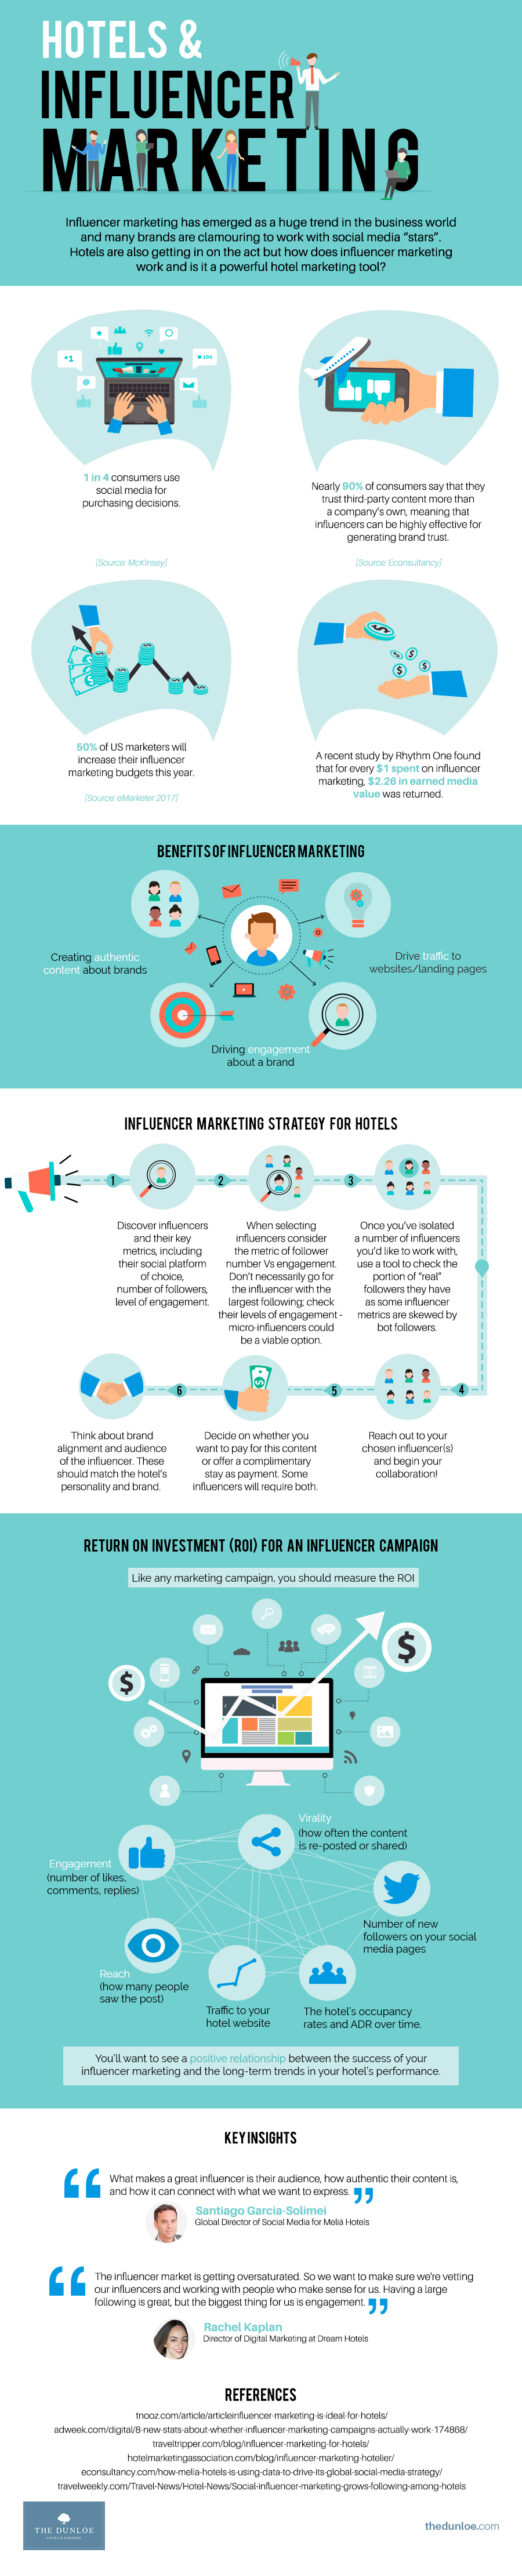 Influencer Marketing for Hotels: What You Need to Know (Infographic)